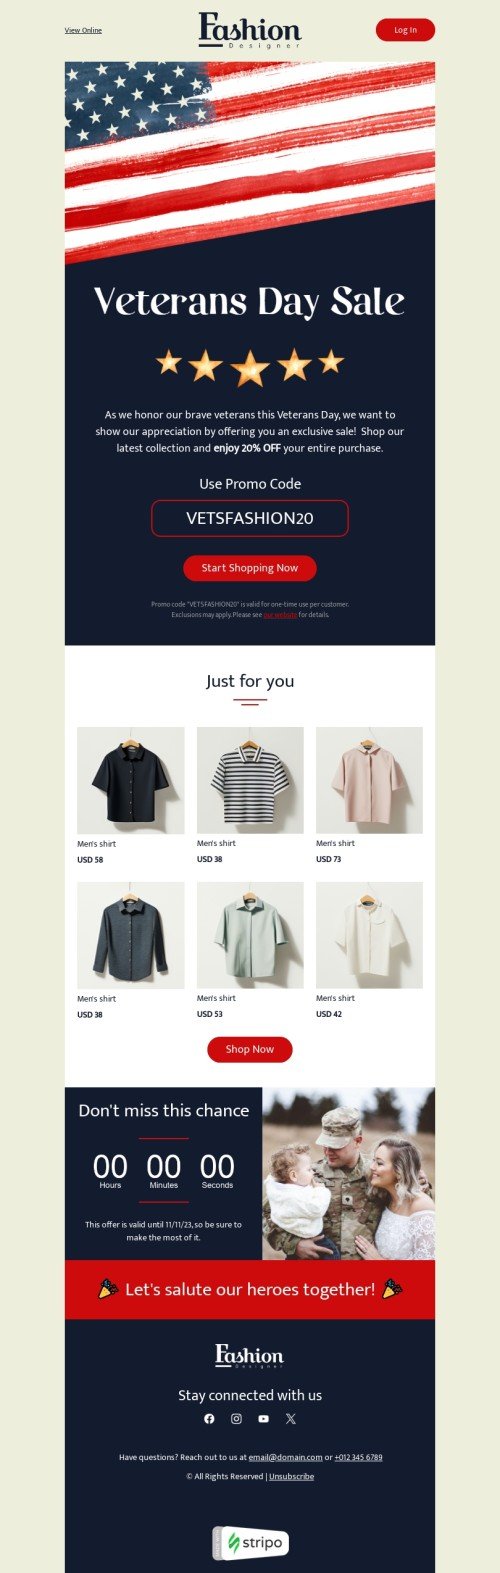 Veterans Day email template "Veterans Day sale" for fashion industry desktop view